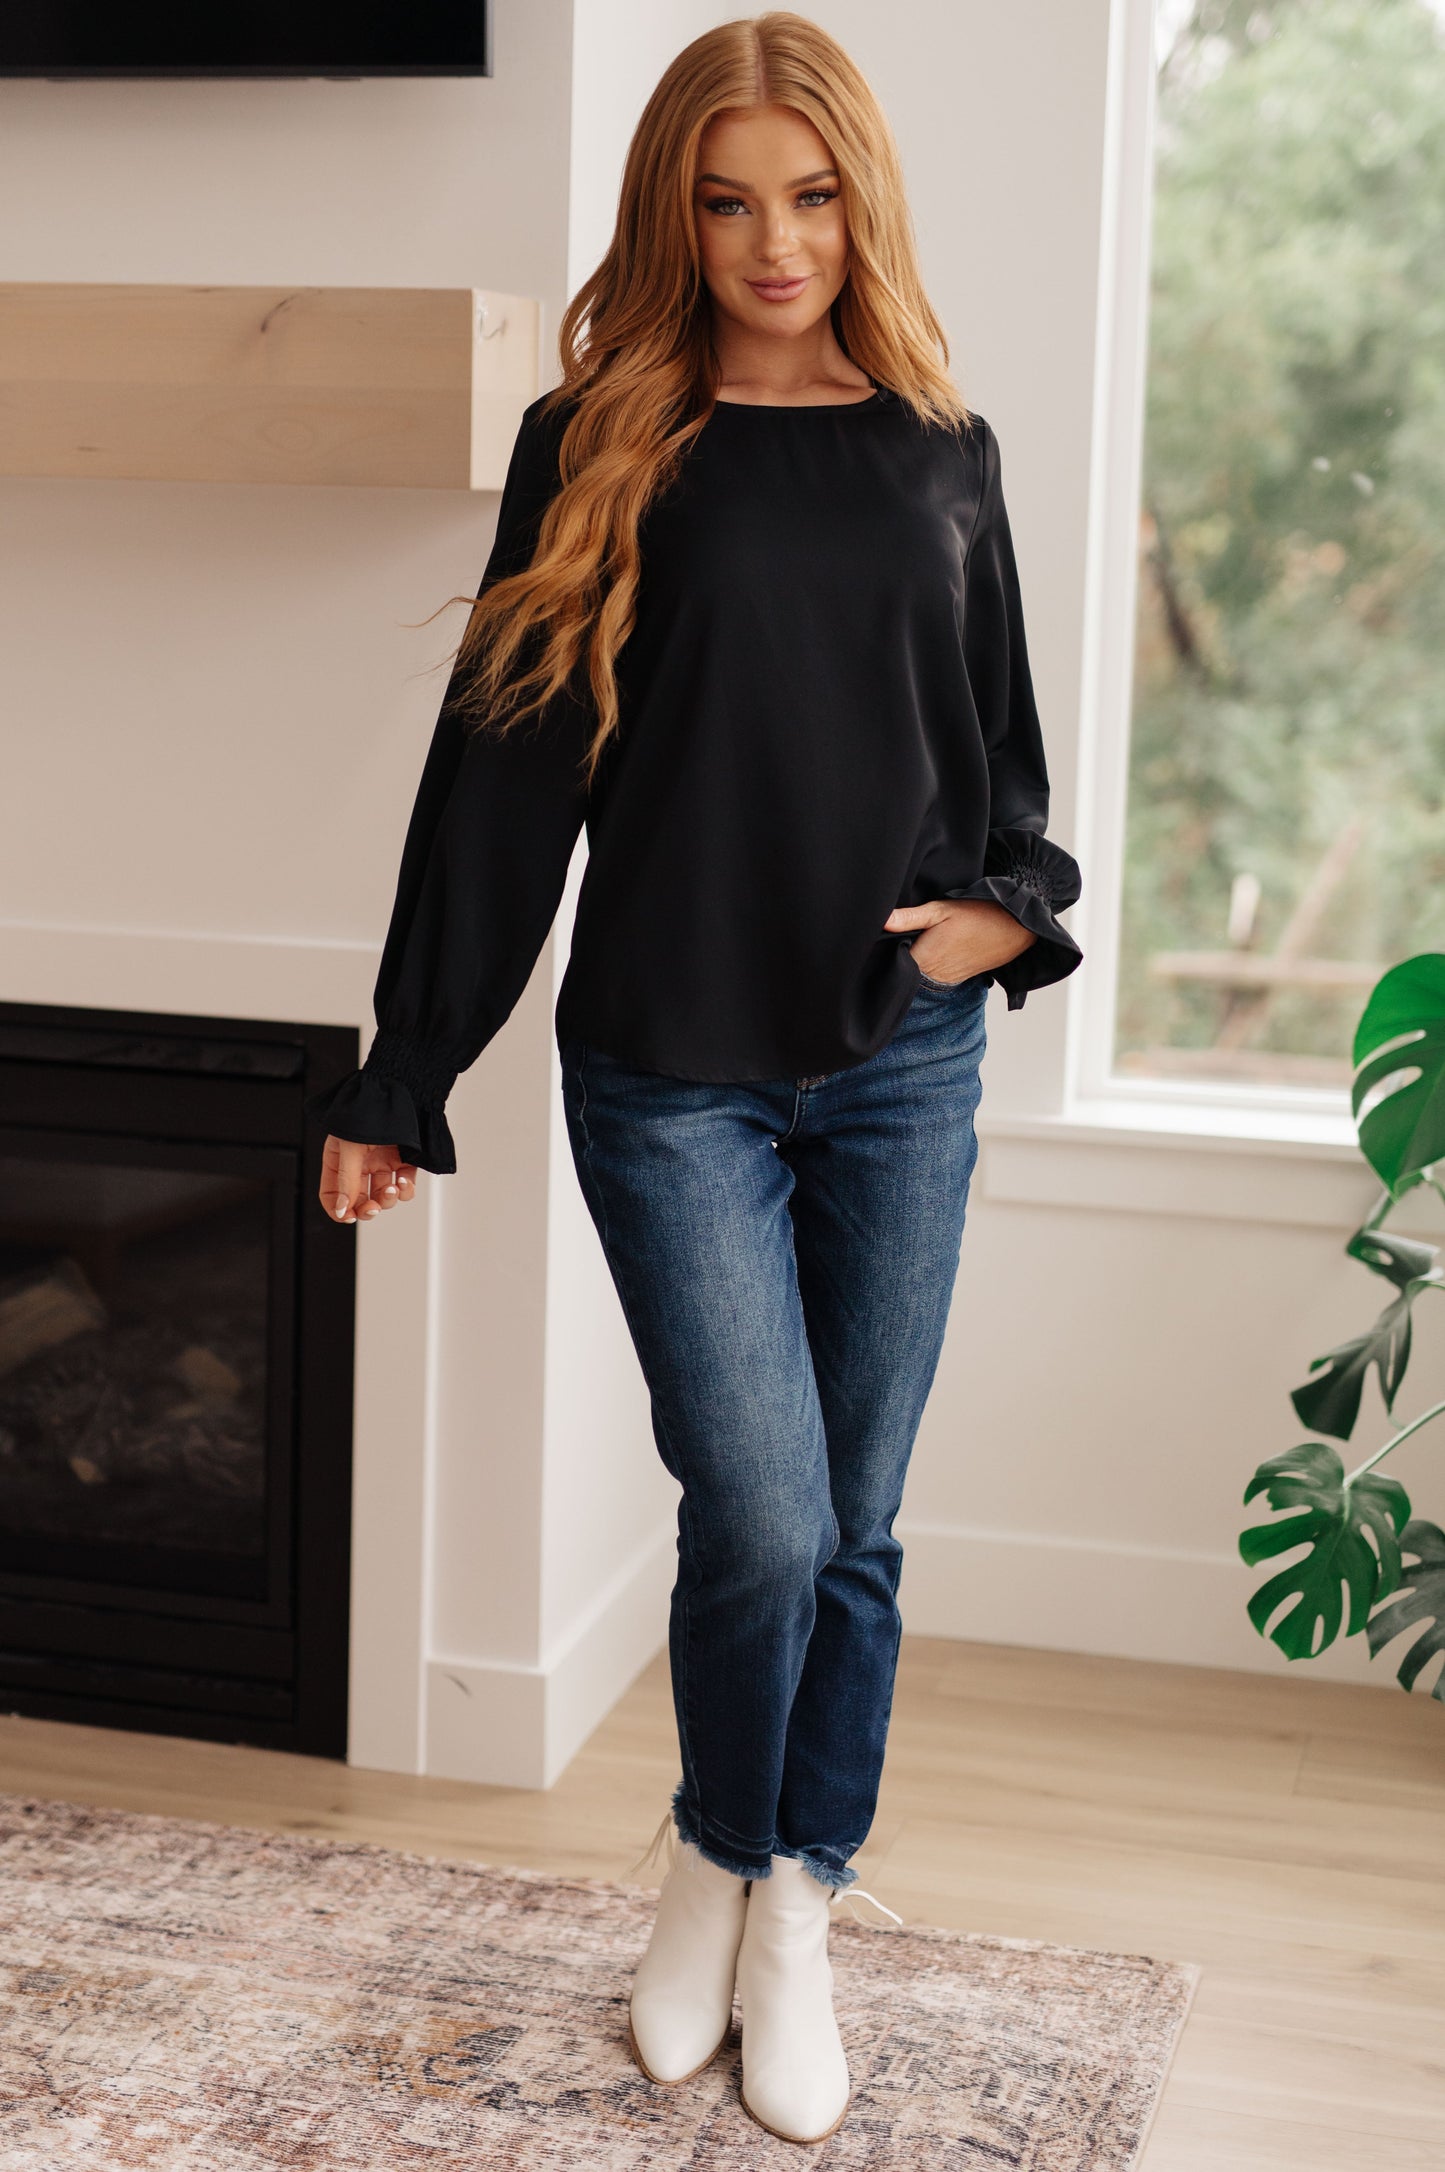 One Eleven North “Peaceful Moments” Smocked Sleeve Blouse in Black